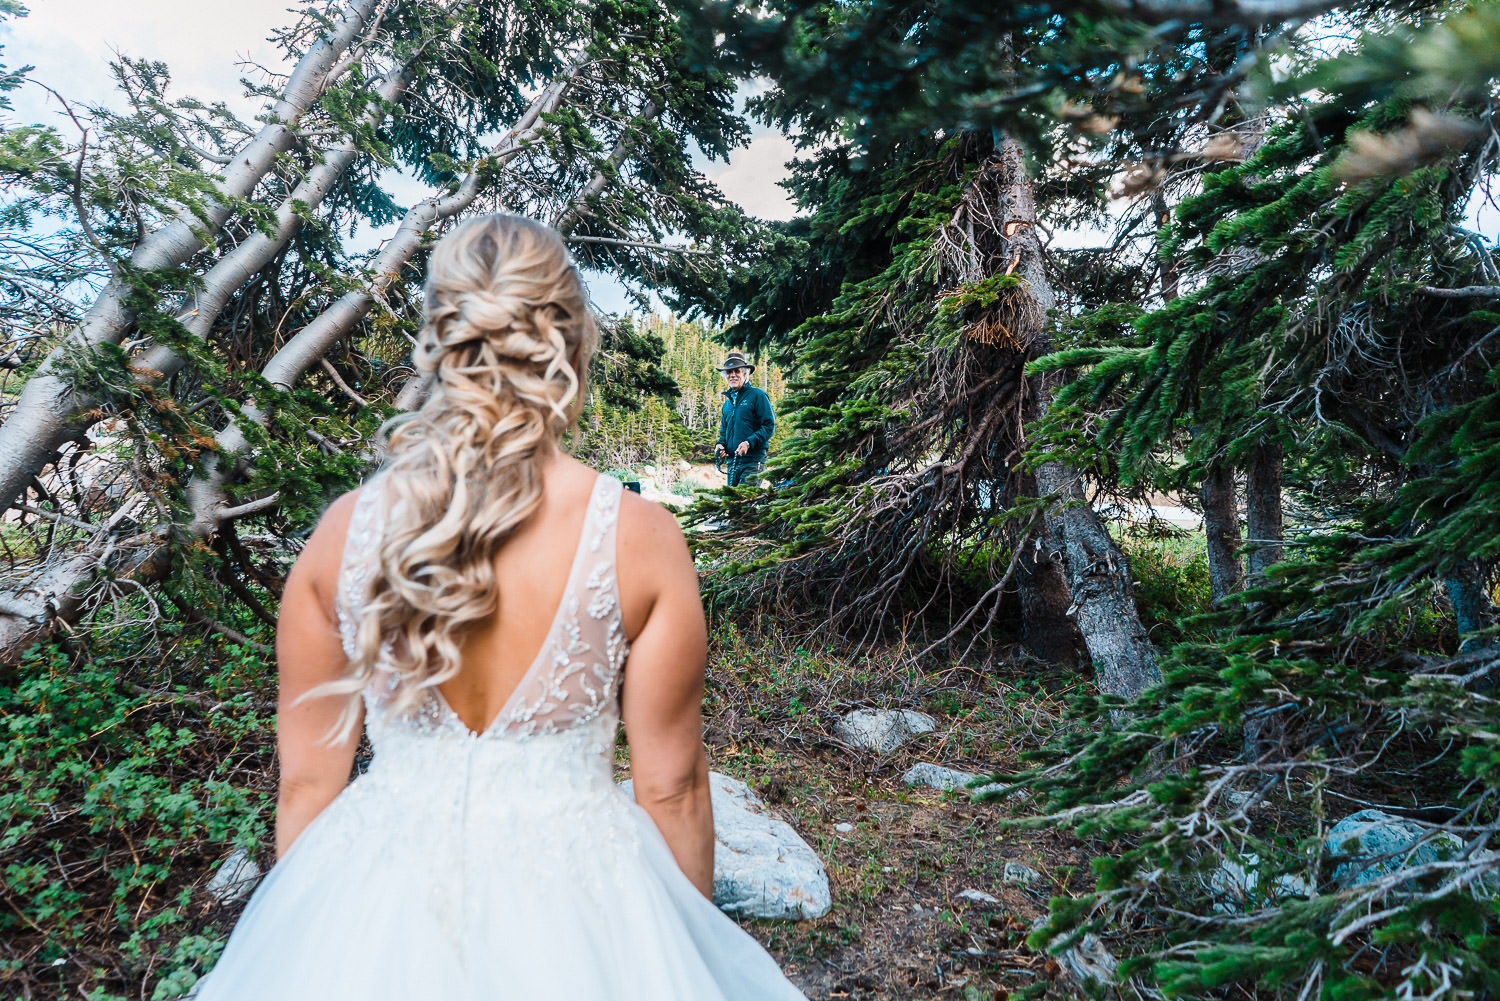 Wyoming Elopement | Run Wild With Me Photography